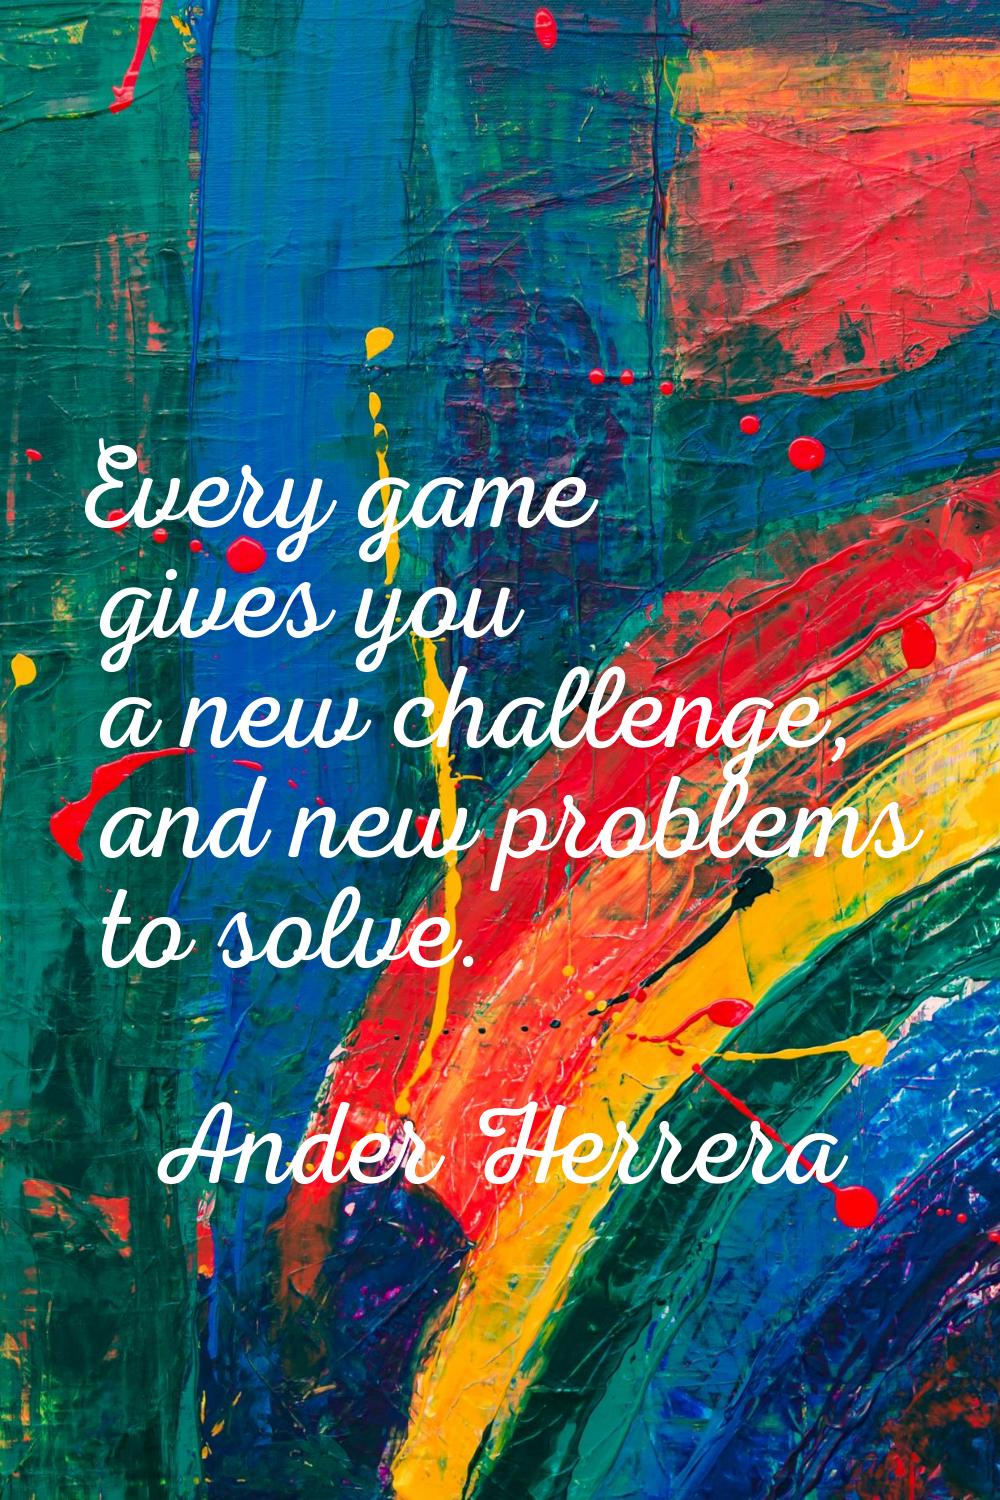 Every game gives you a new challenge, and new problems to solve.